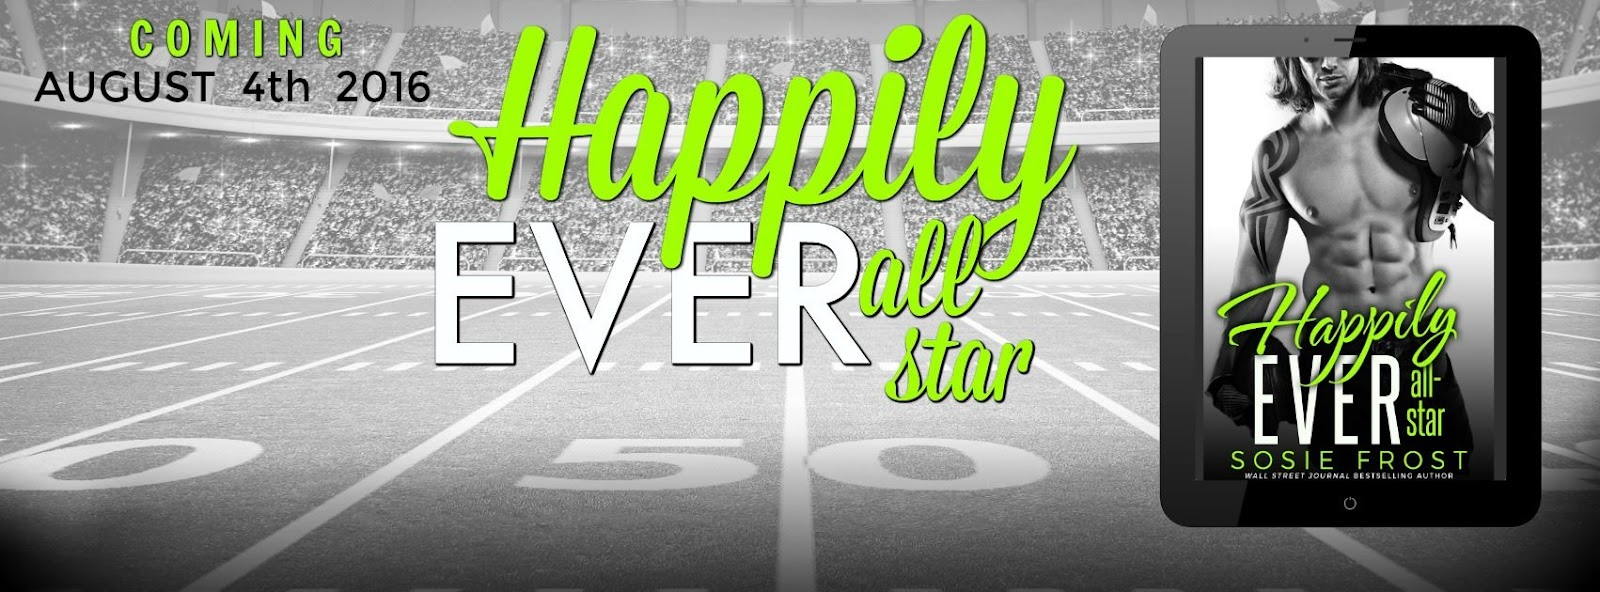 happily ever all star.jpg